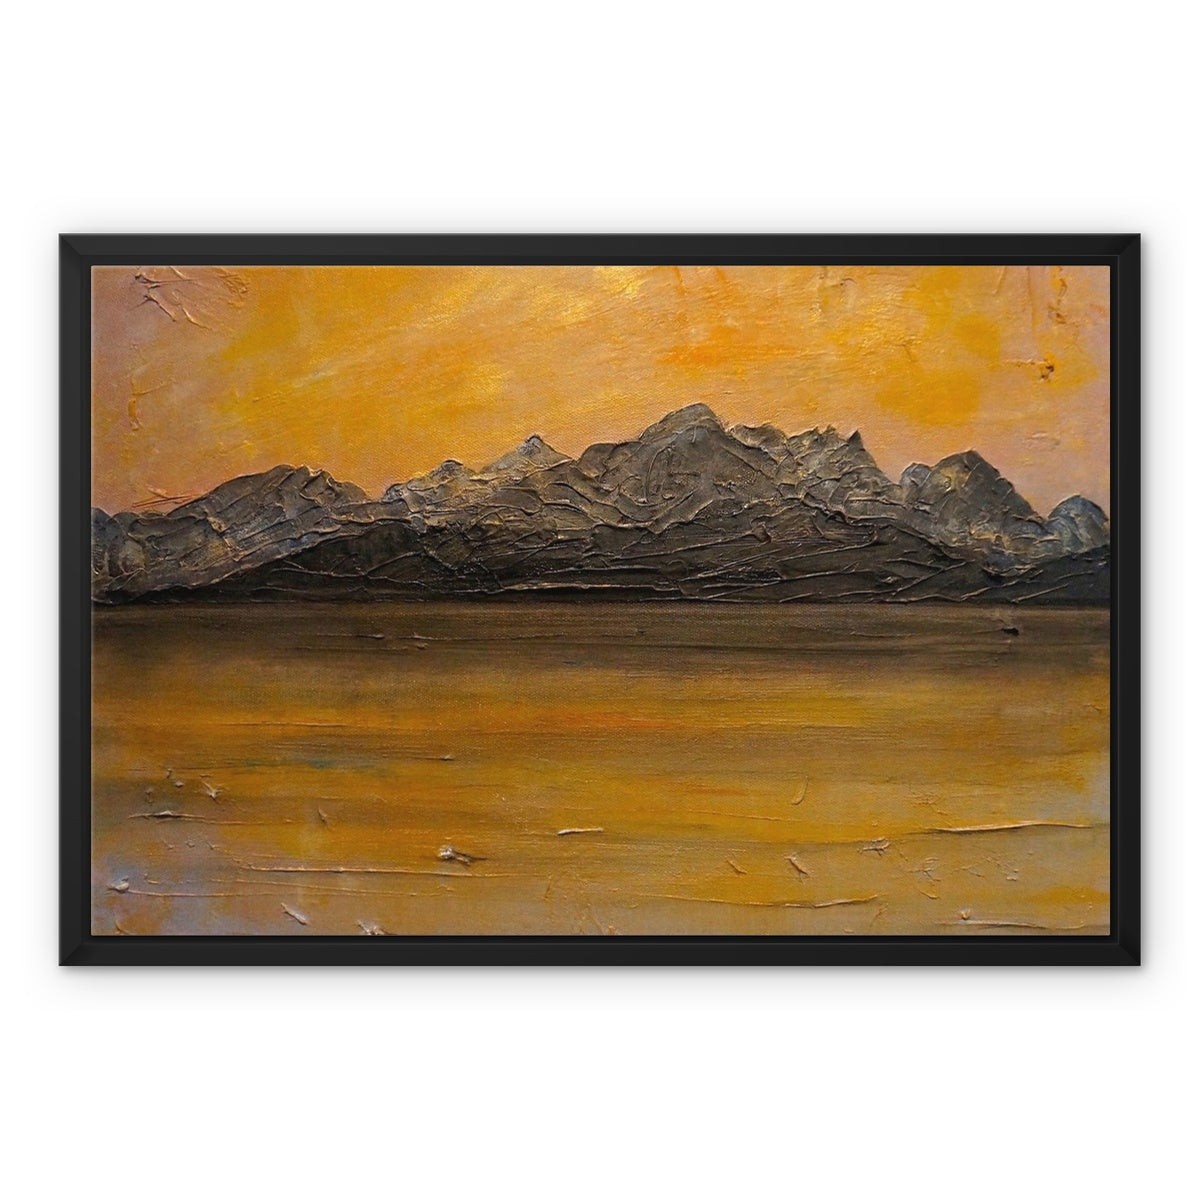 Cuillin Sunset Skye Painting | Framed Canvas From Scotland-Floating Framed Canvas Prints-Skye Art Gallery-24"x18"-Black Frame-Paintings, Prints, Homeware, Art Gifts From Scotland By Scottish Artist Kevin Hunter